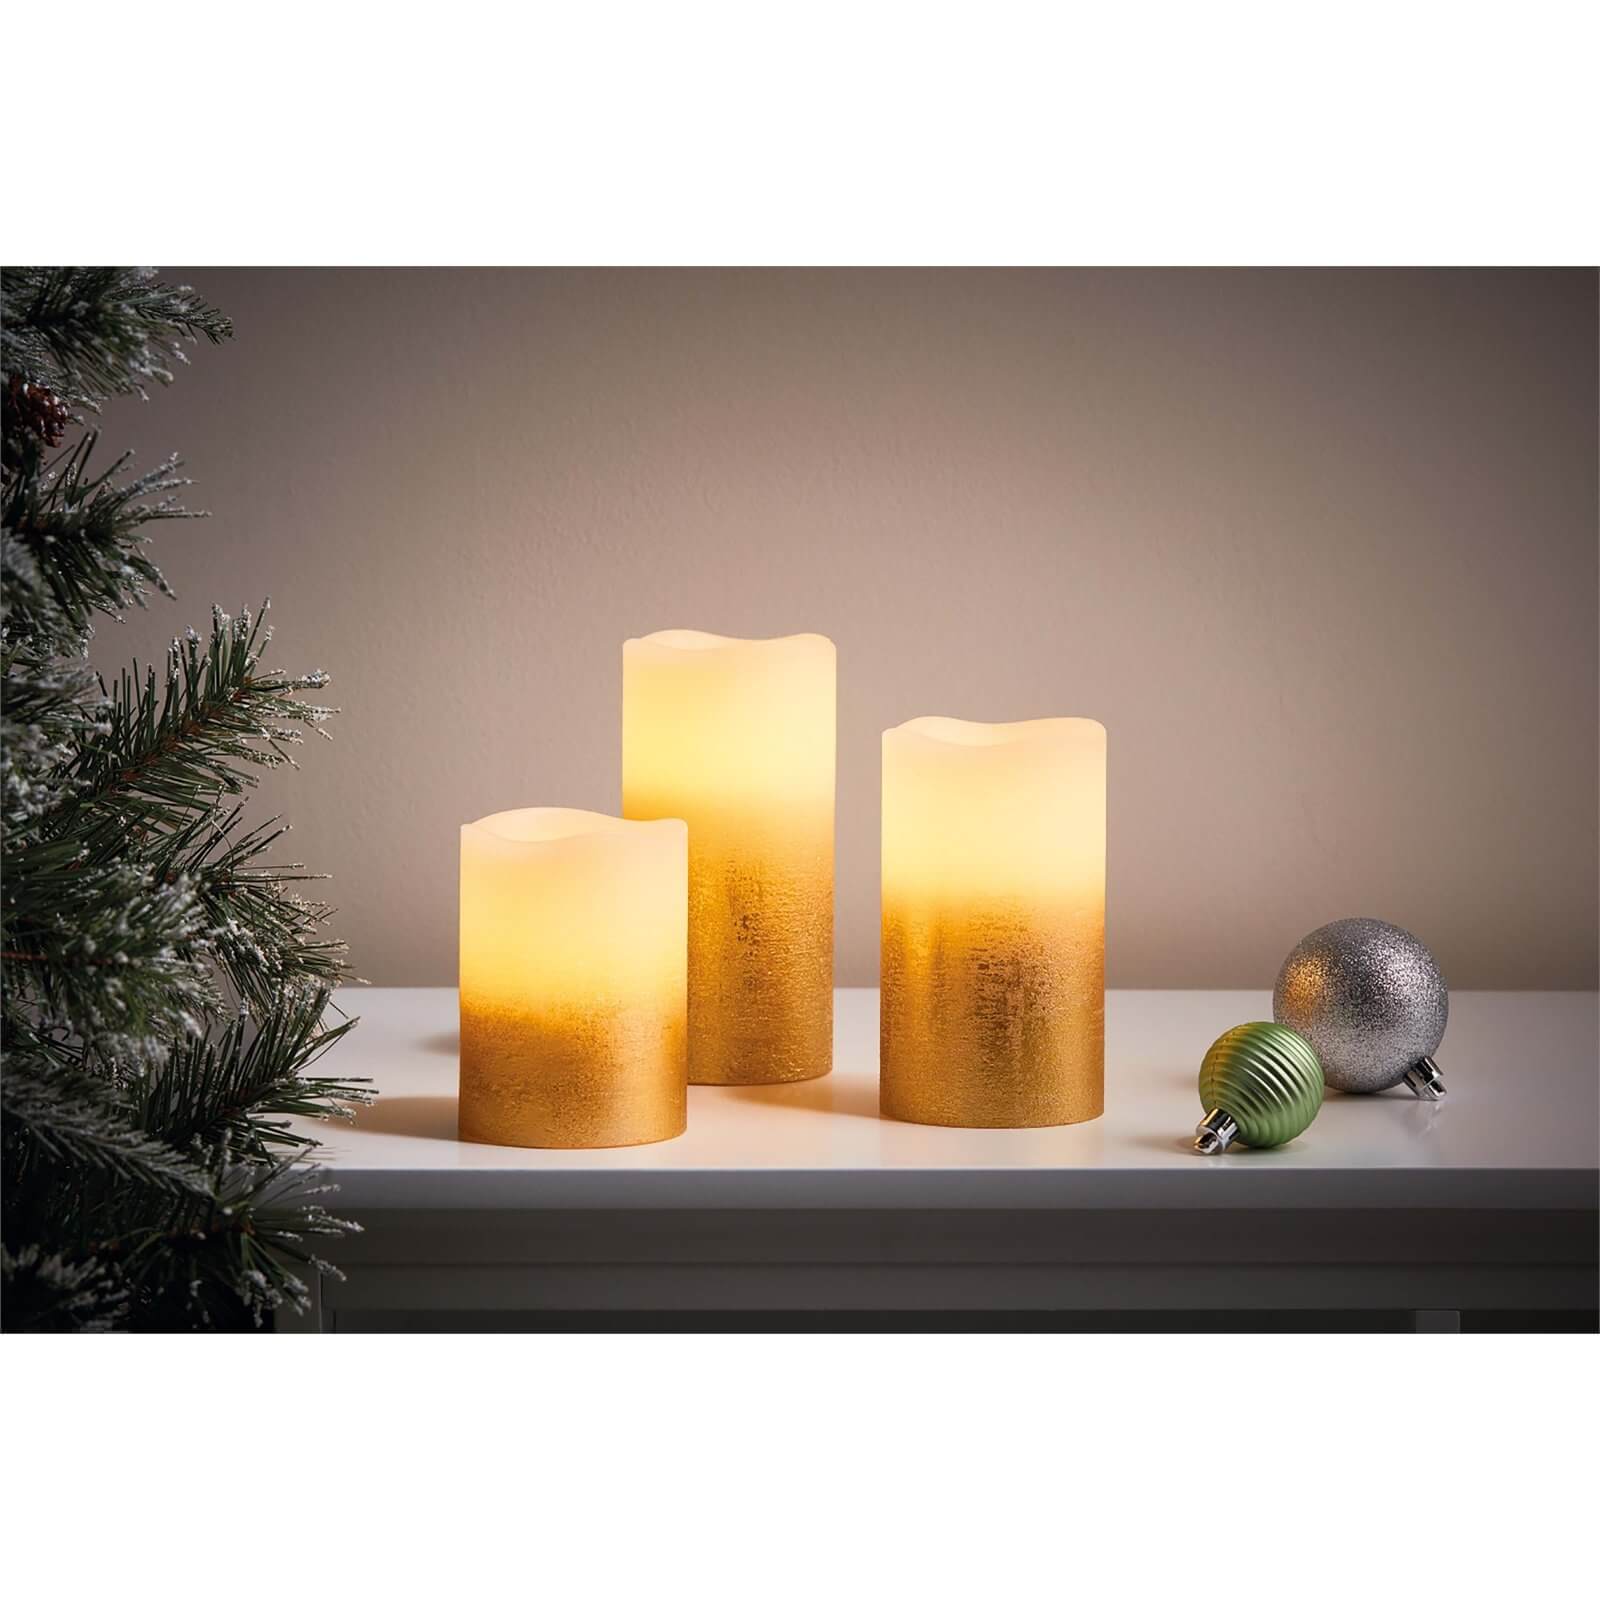 3 LED Gold Ombre Pillar Christmas Candles (Battery Operated)